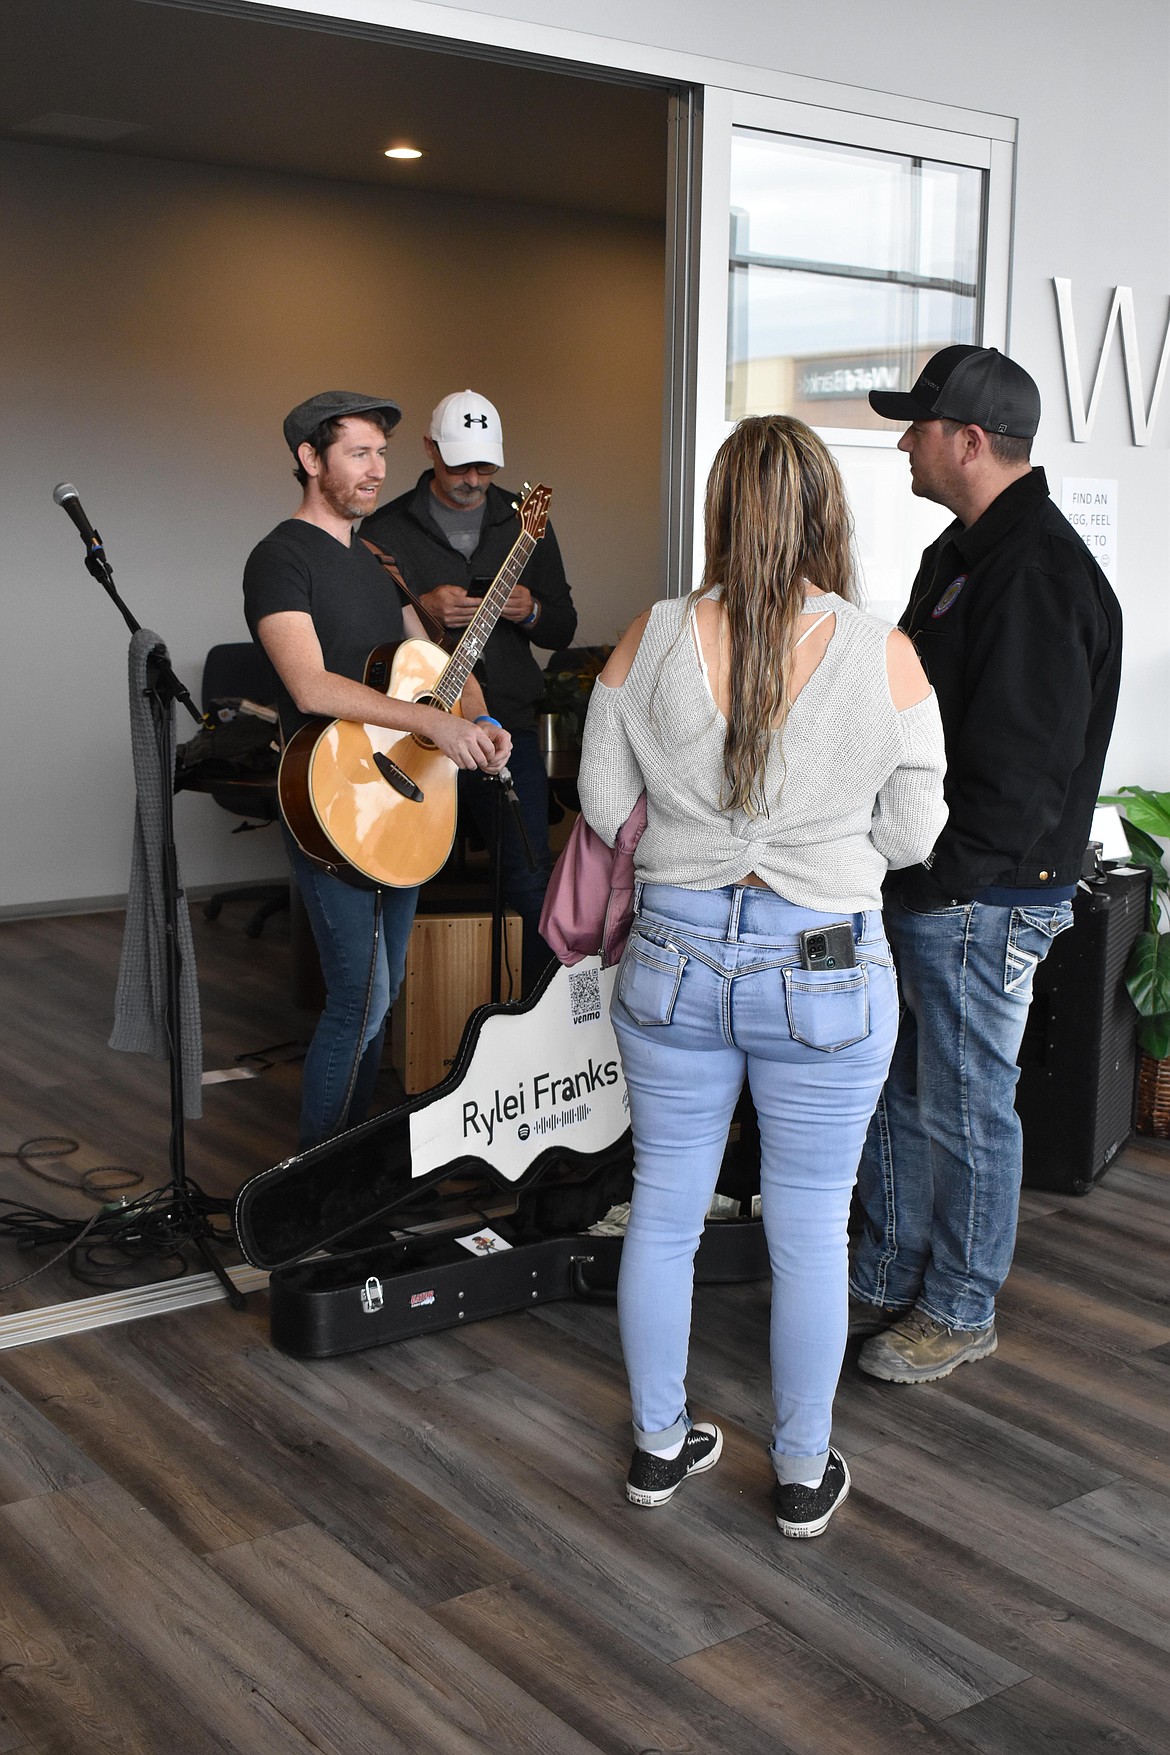 Community members got to mingle with some of the bands and musicians at Brews & Tunes March 19. Above, a couple talk to Rylei Franks who was performing inside Windermere K2 Realty.